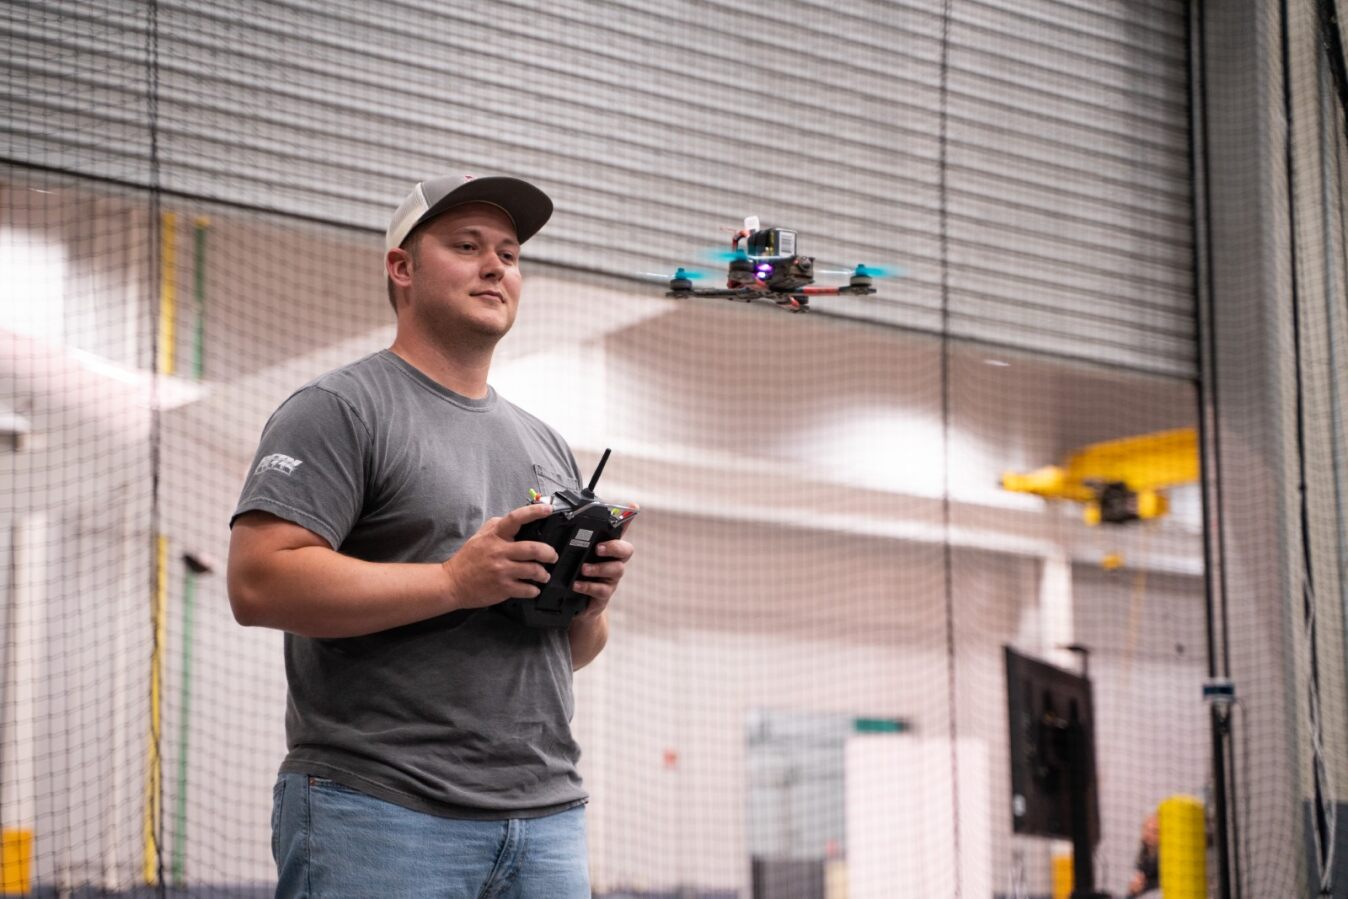 Man holding a controller that is moving a small drone